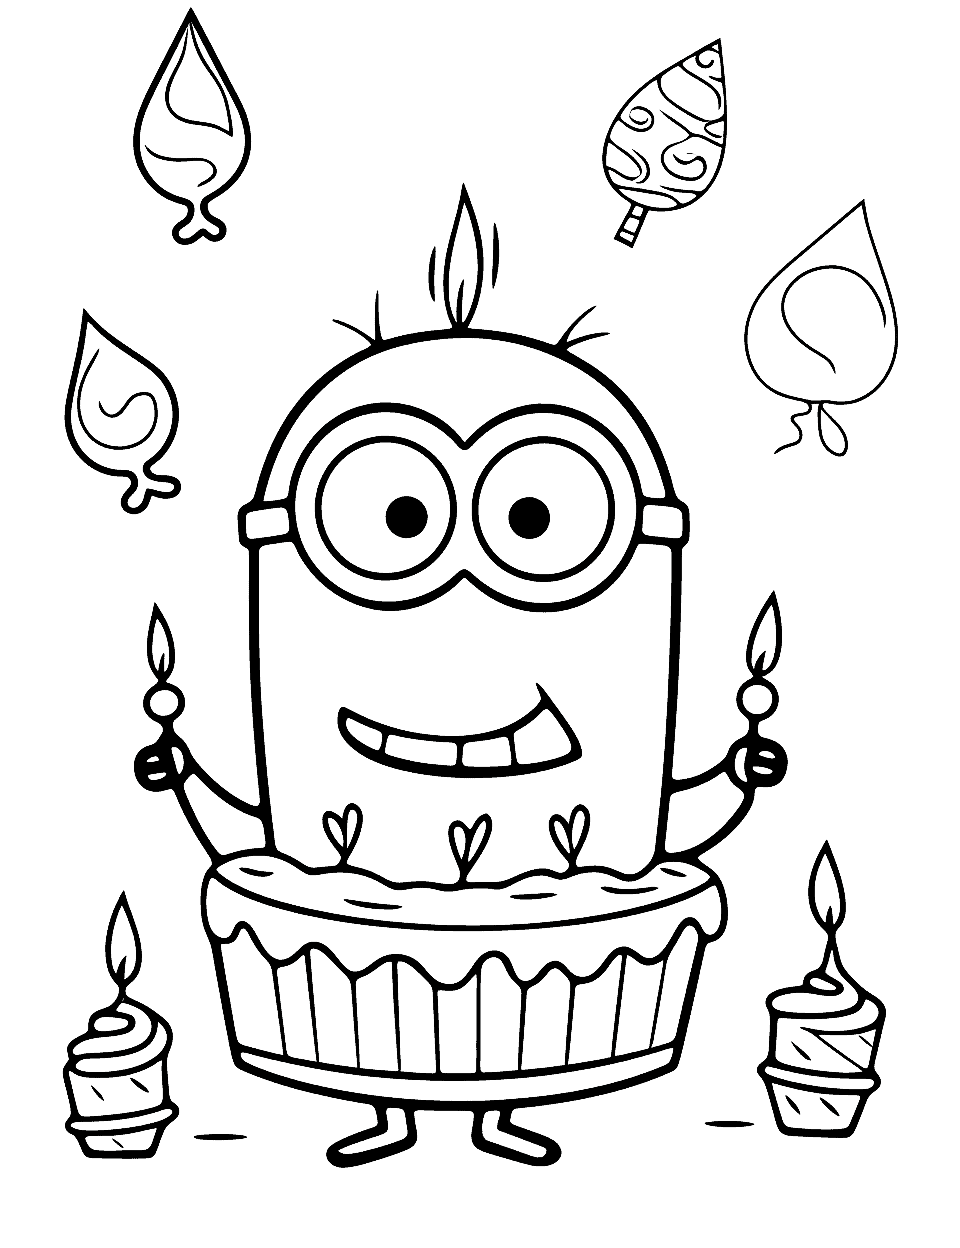 Minion's Banana Birthday Happy Coloring Page - A Minion celebrating its birthday with candles and cake.